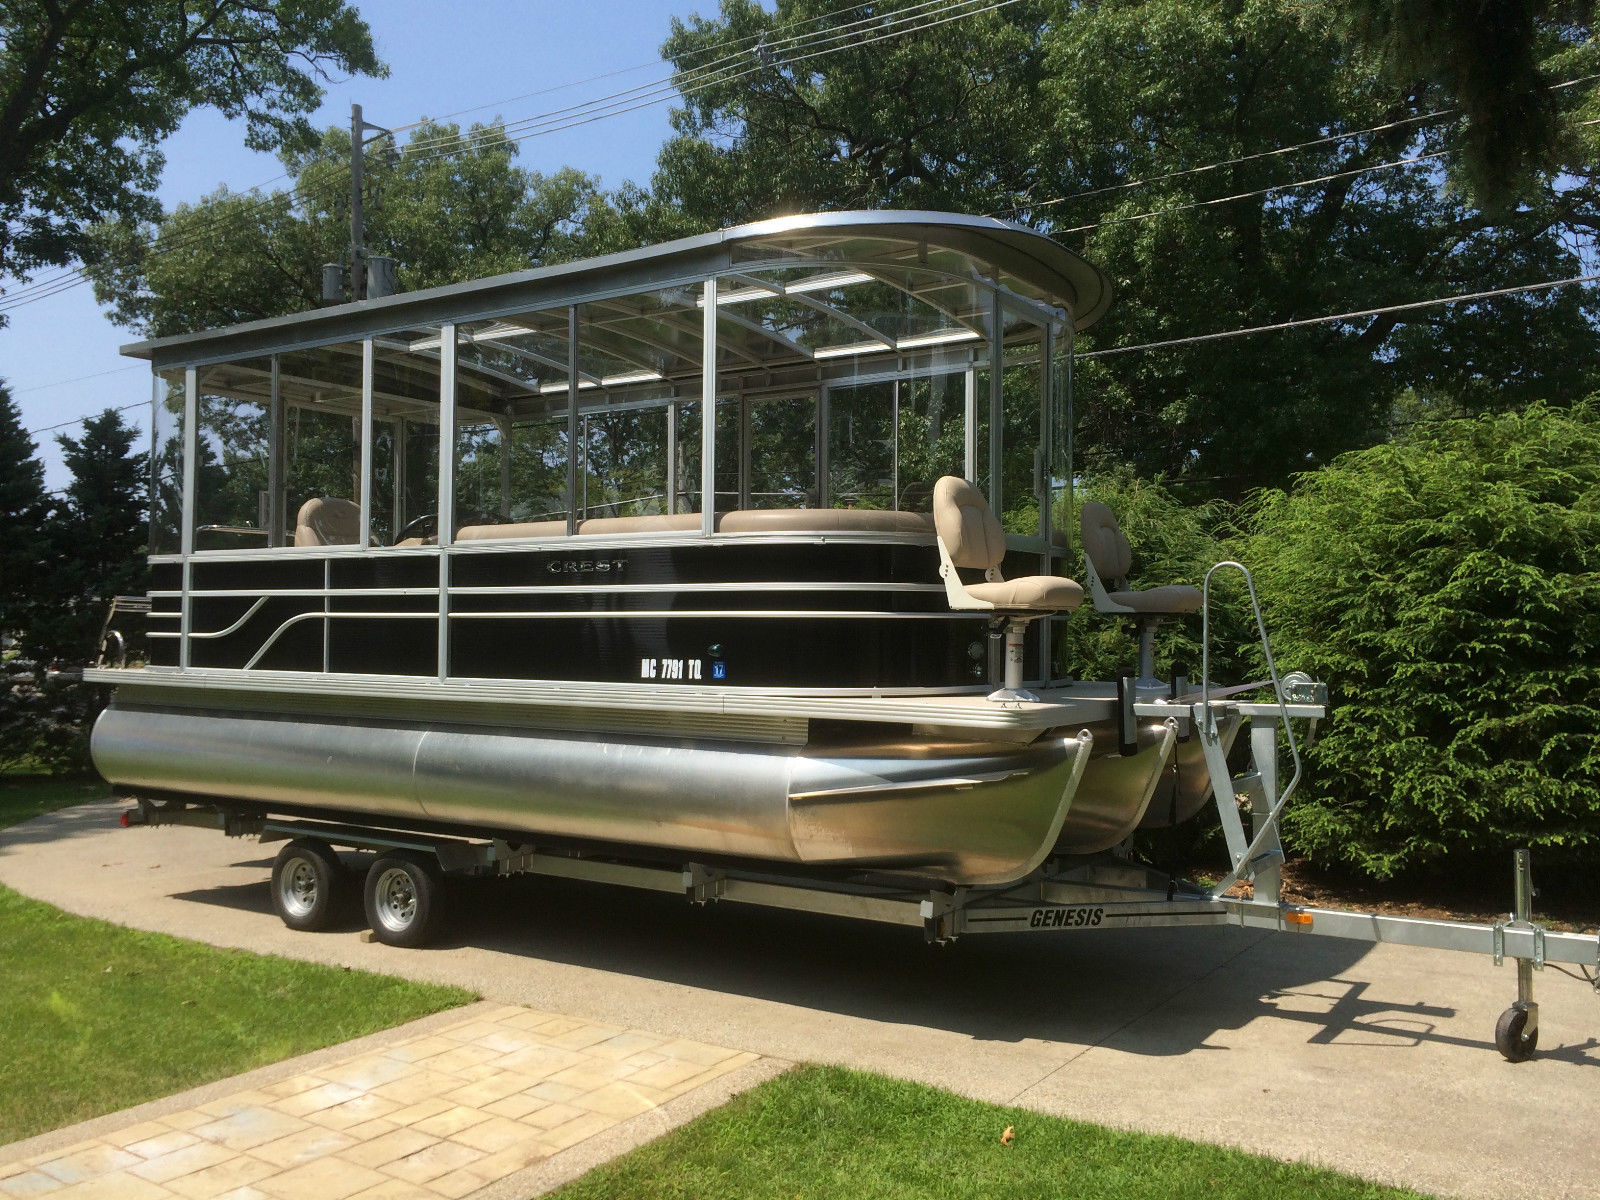 Pontoon Boats Market Size, Share, 2023 Global Industry Forecasts Analysis, Company Profiles, Competitive Landscape and Key Regions Analysis